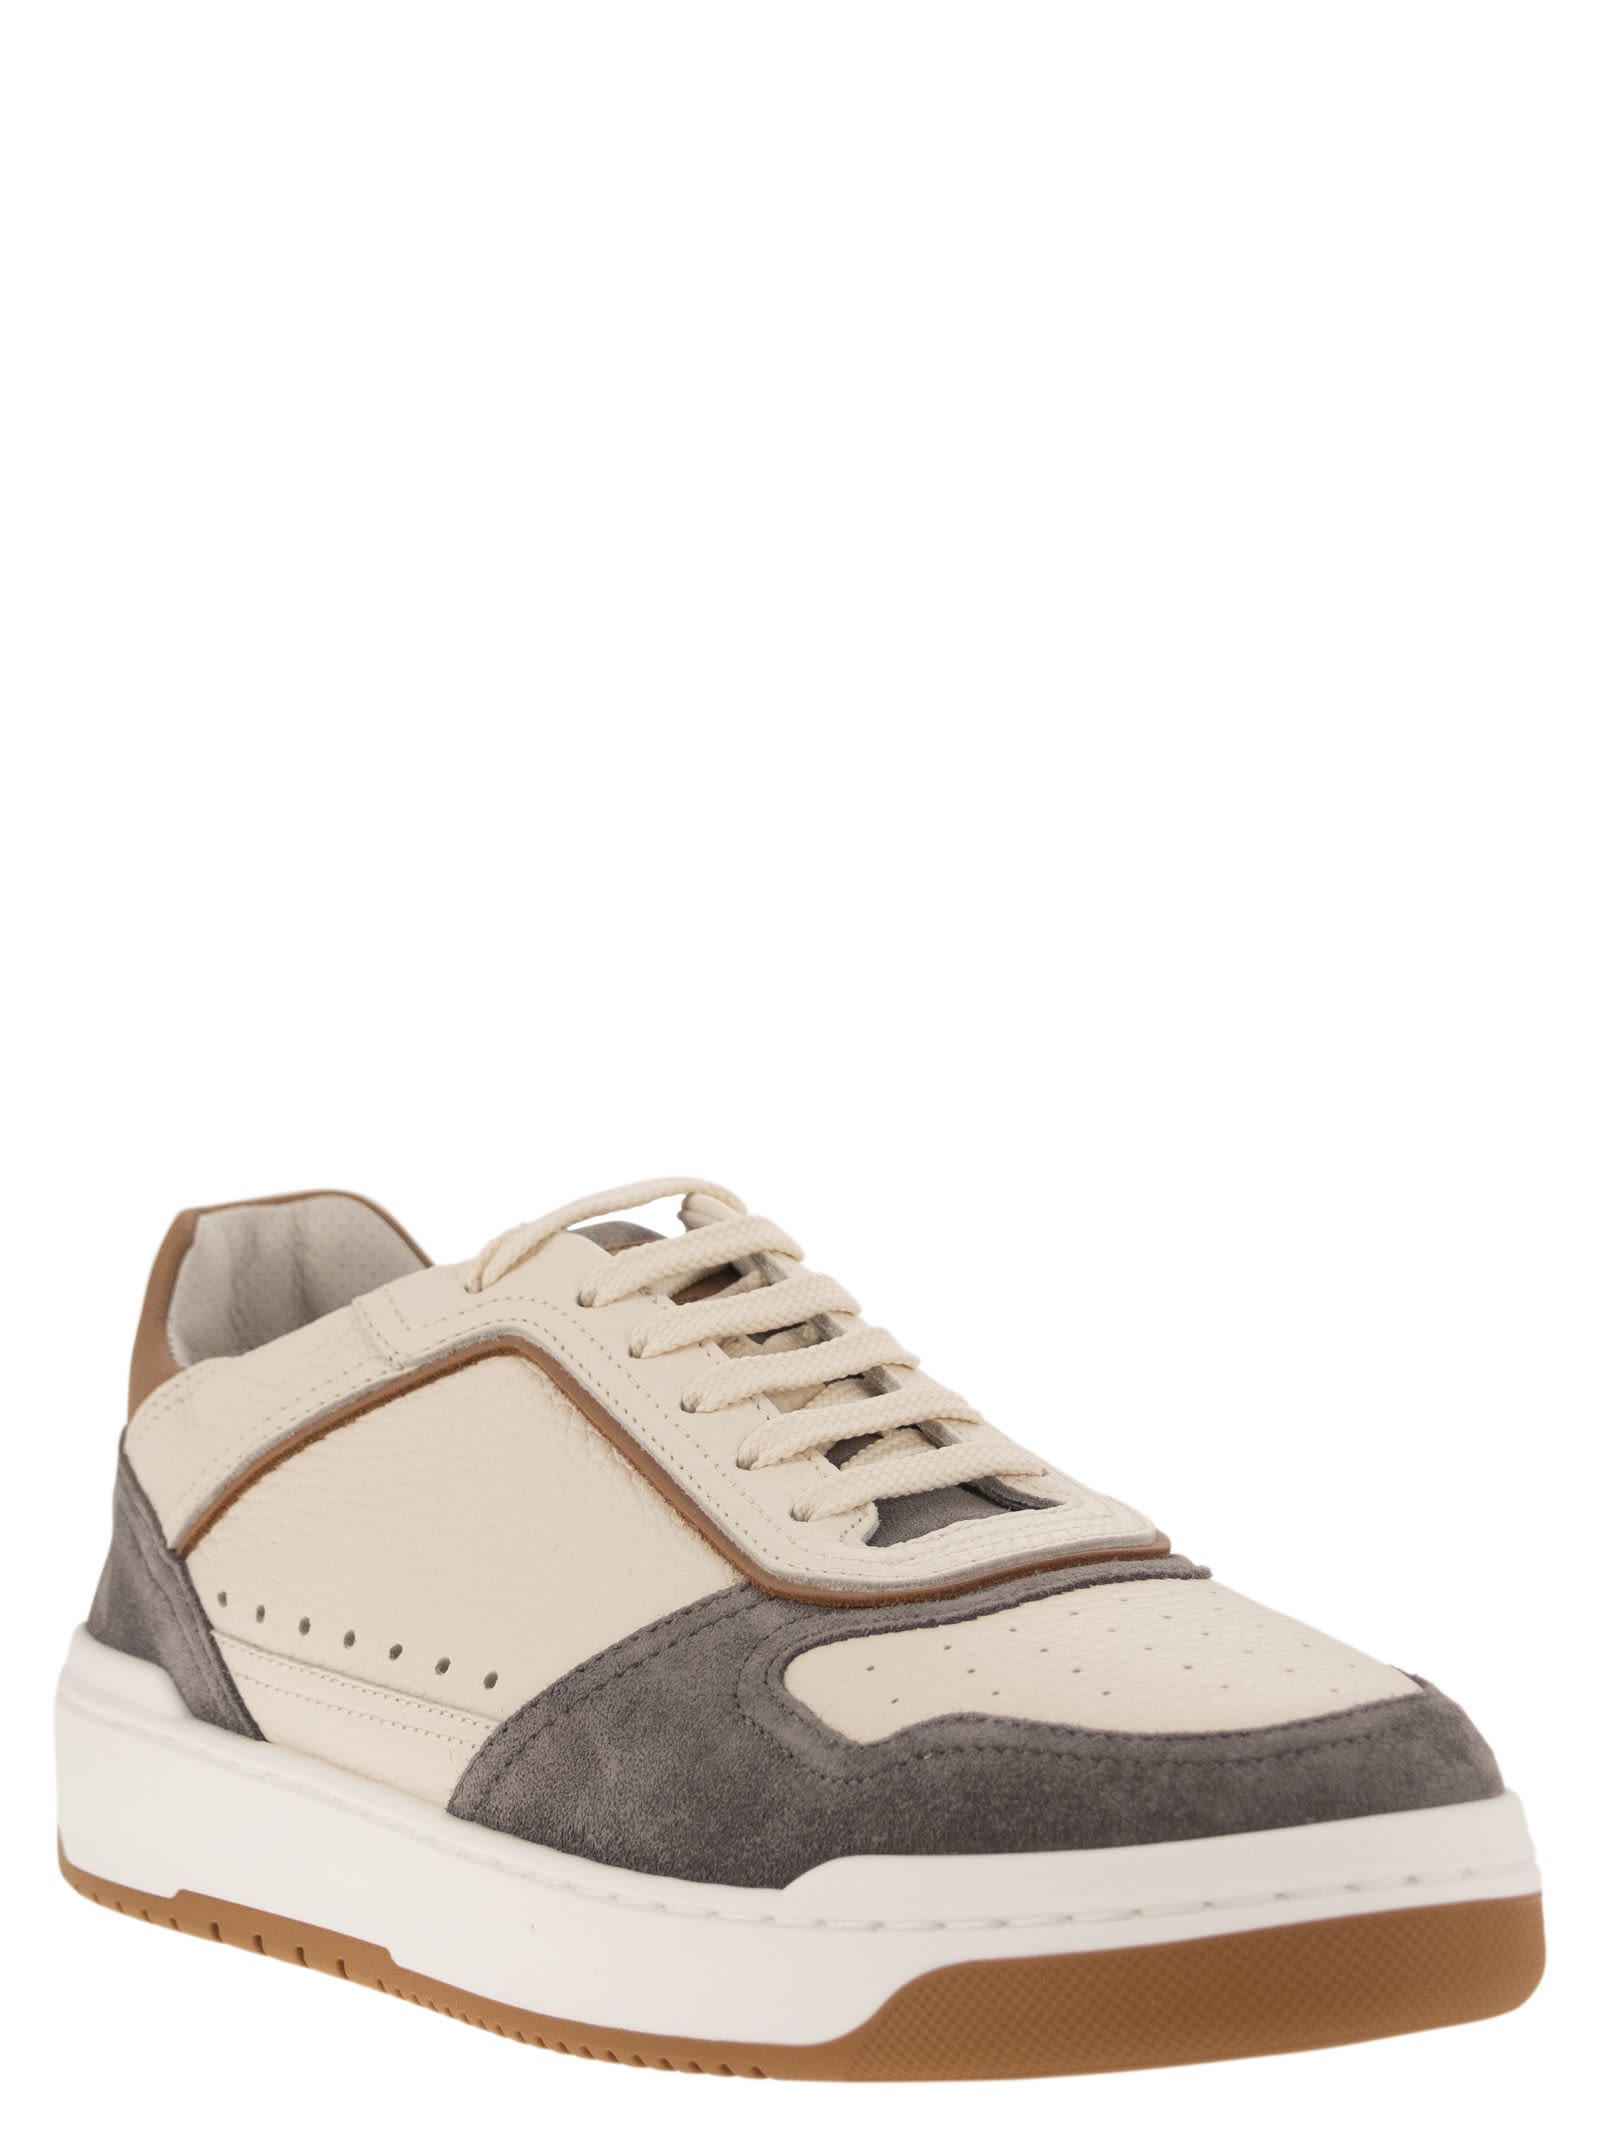 Sneakers winter Brunello Cucinelli buy for 175 EUR in the UKRFashion store.  luxury goods brand Brunello Cucinelli. Best quality